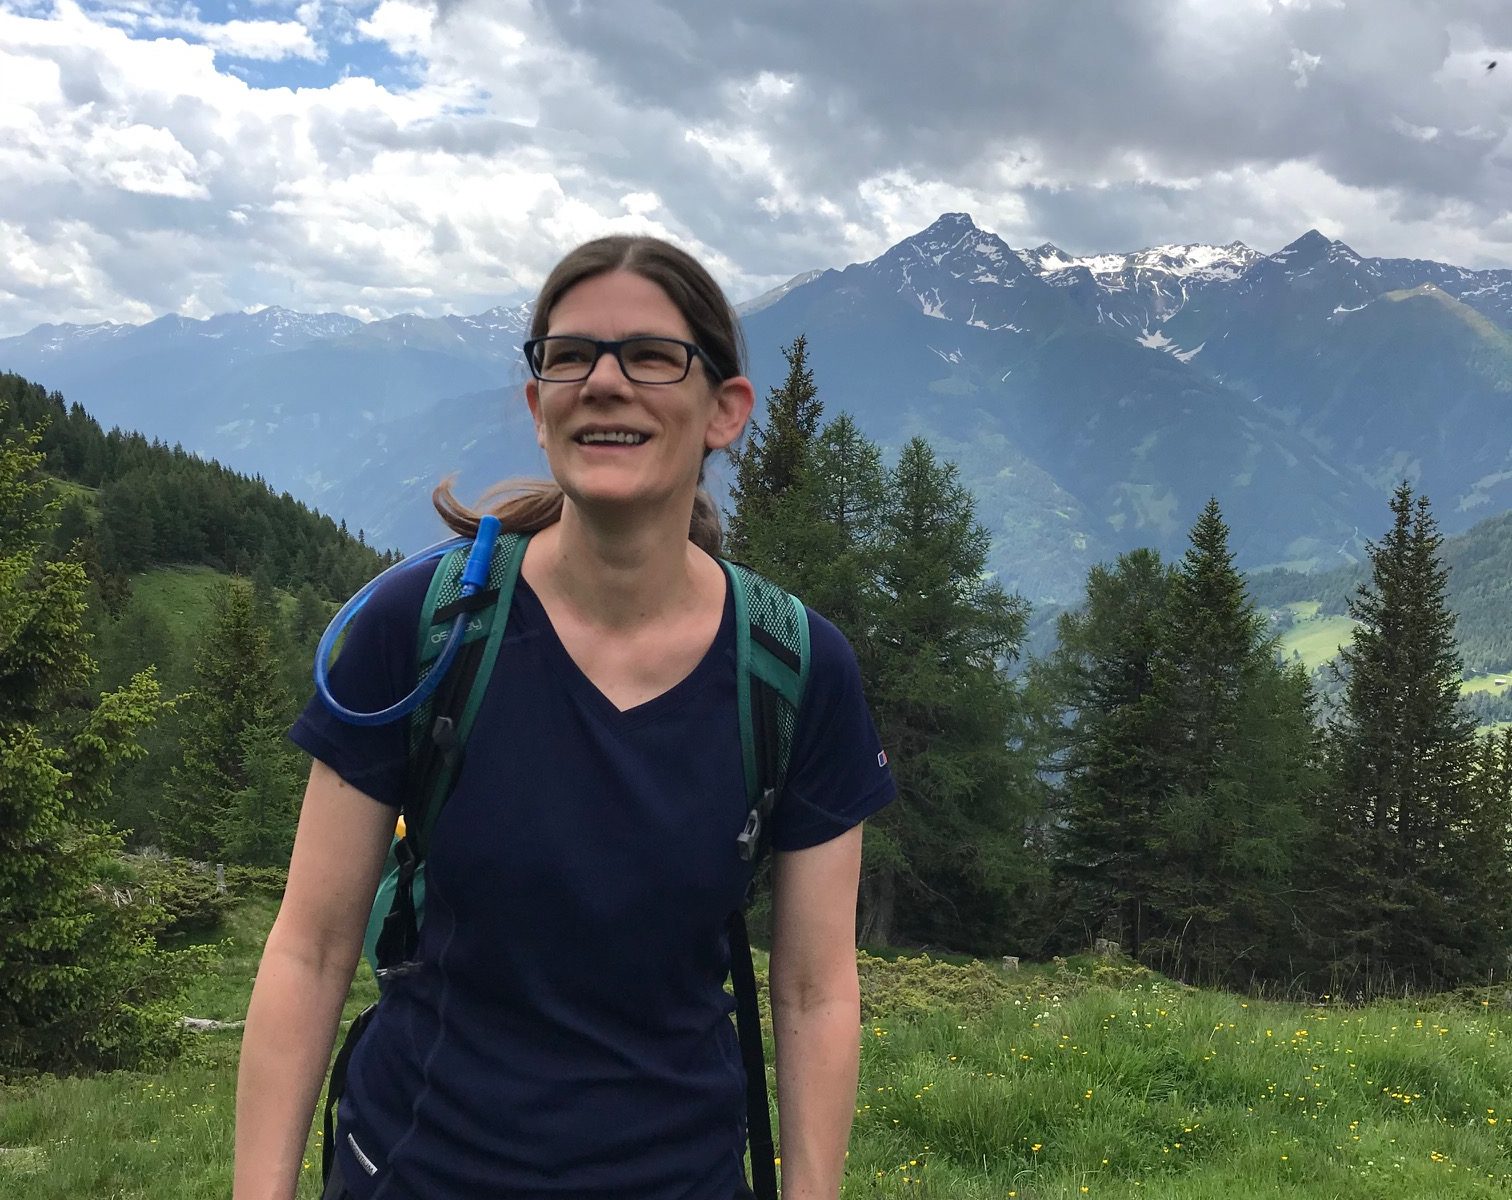 Louise smiling with trees and mountains in the background.